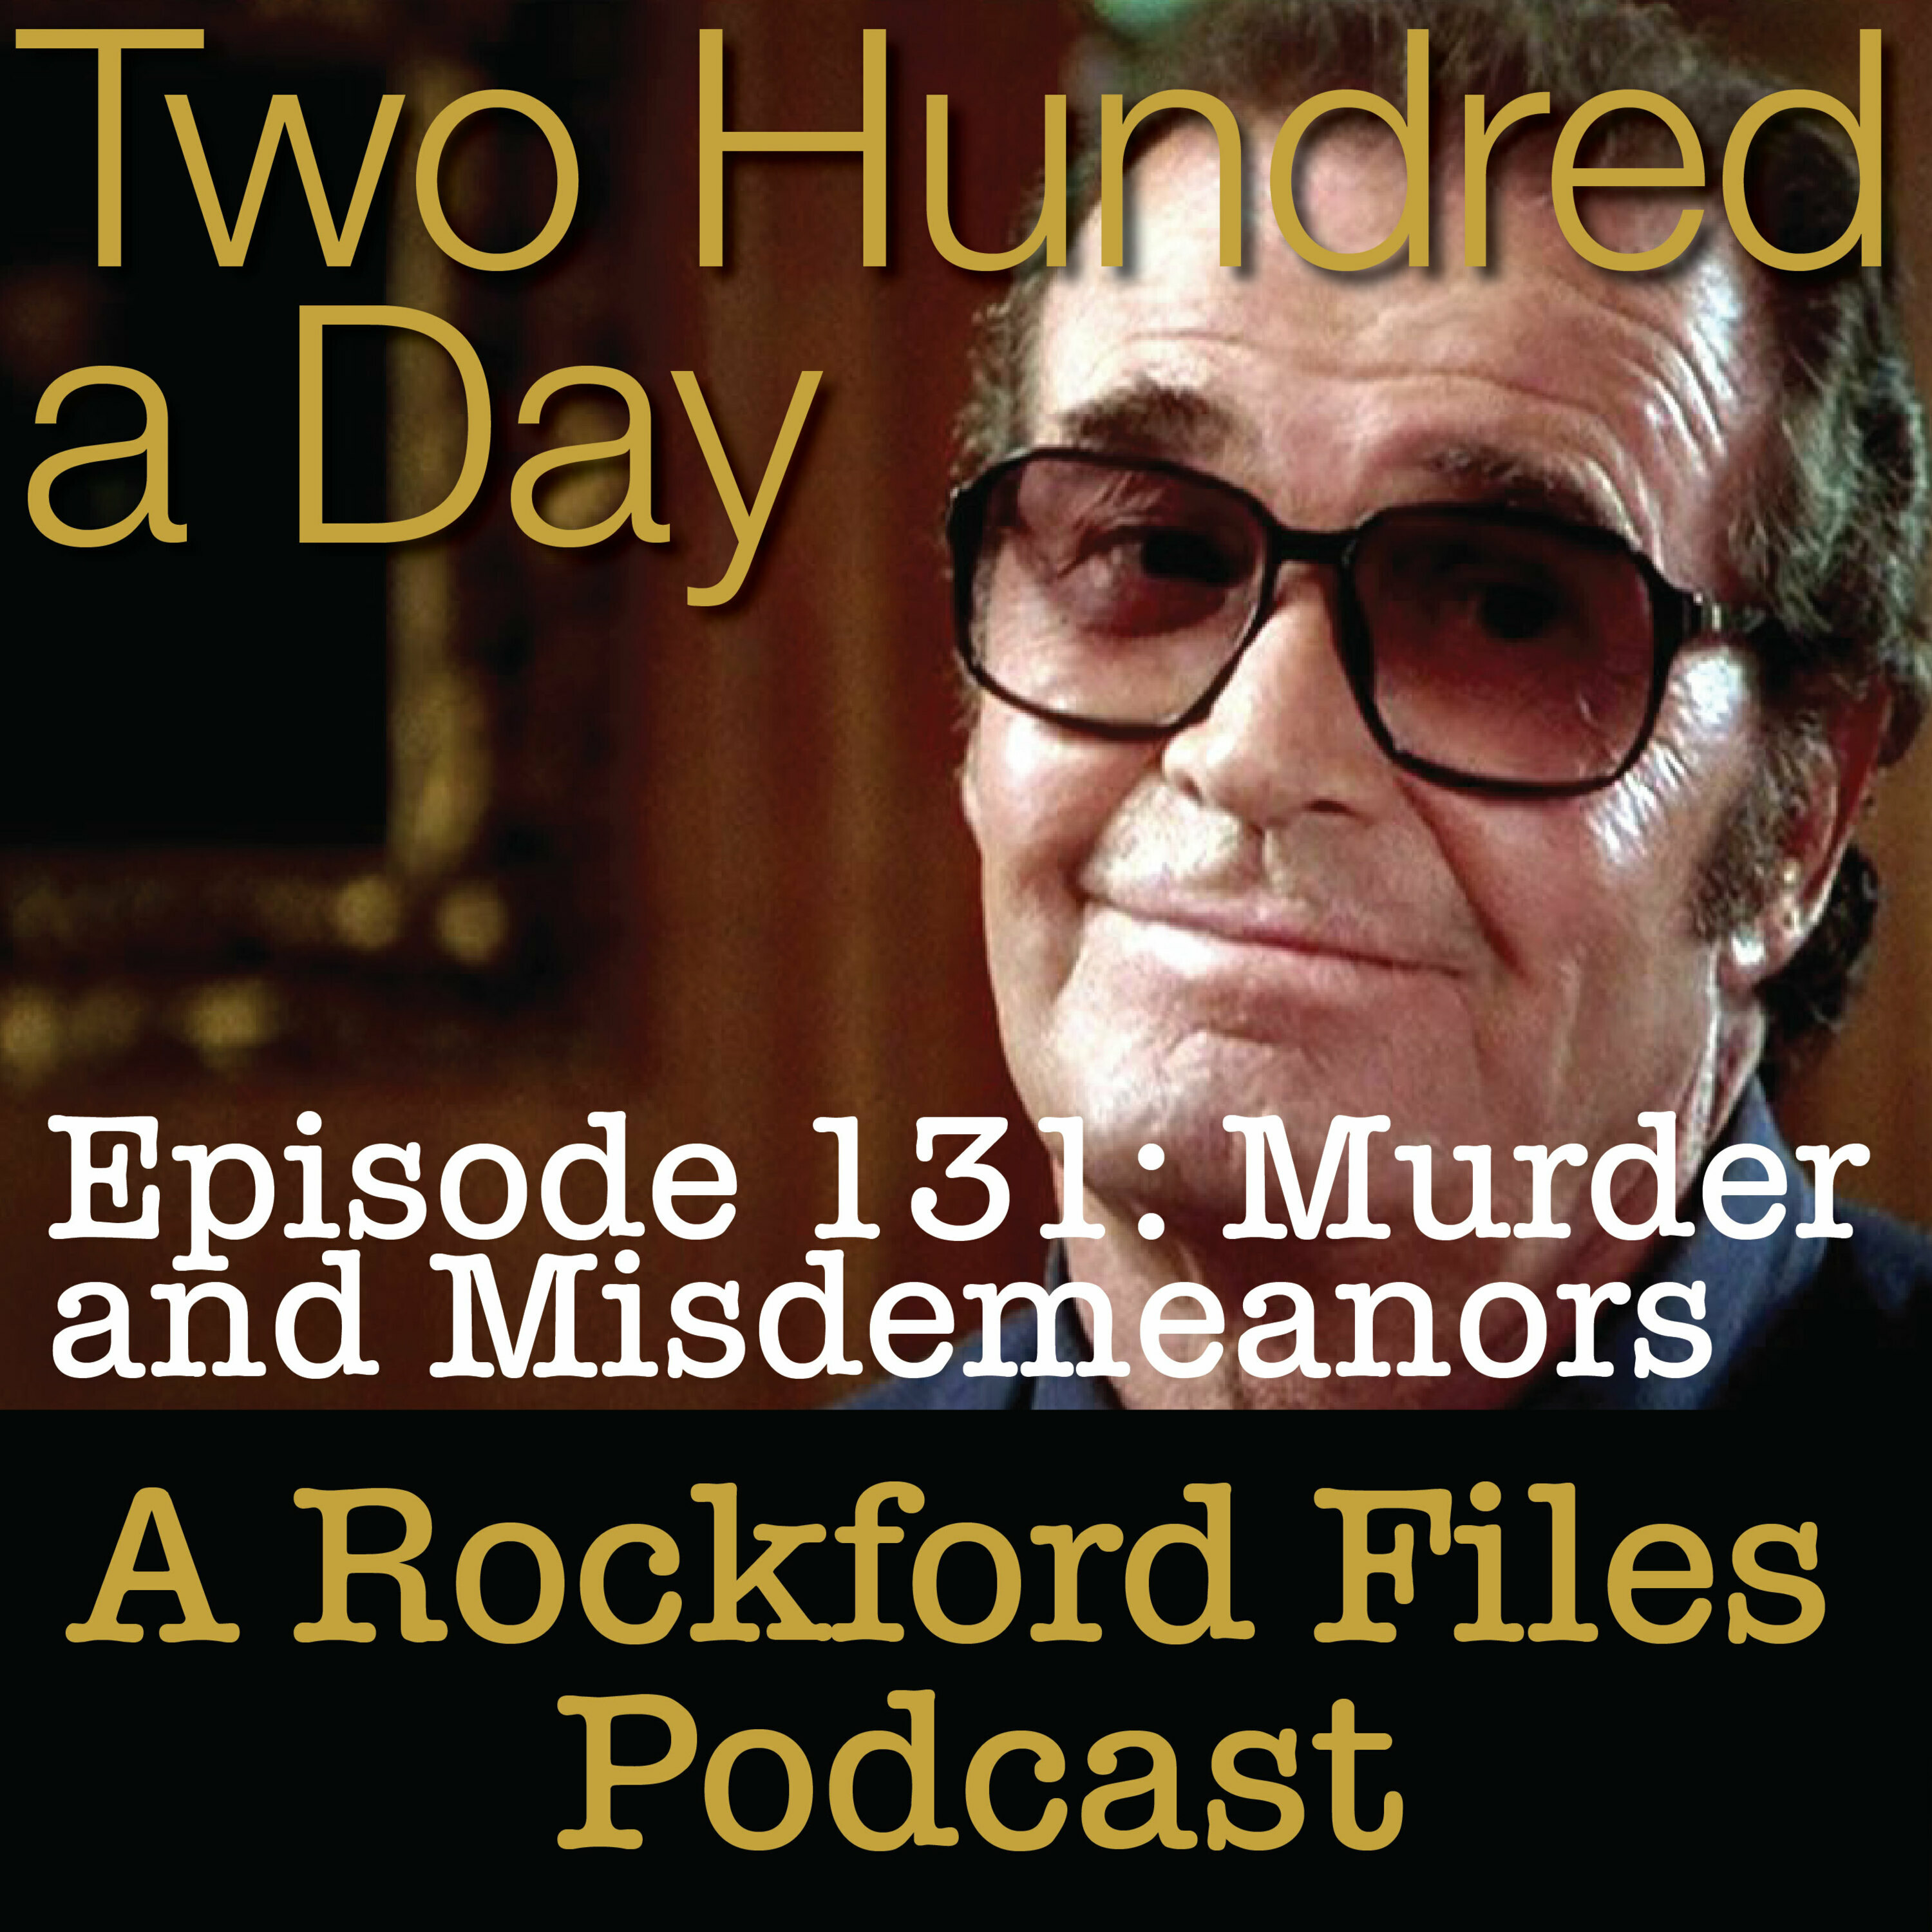 Episode 131: Murder and Misdemeanors